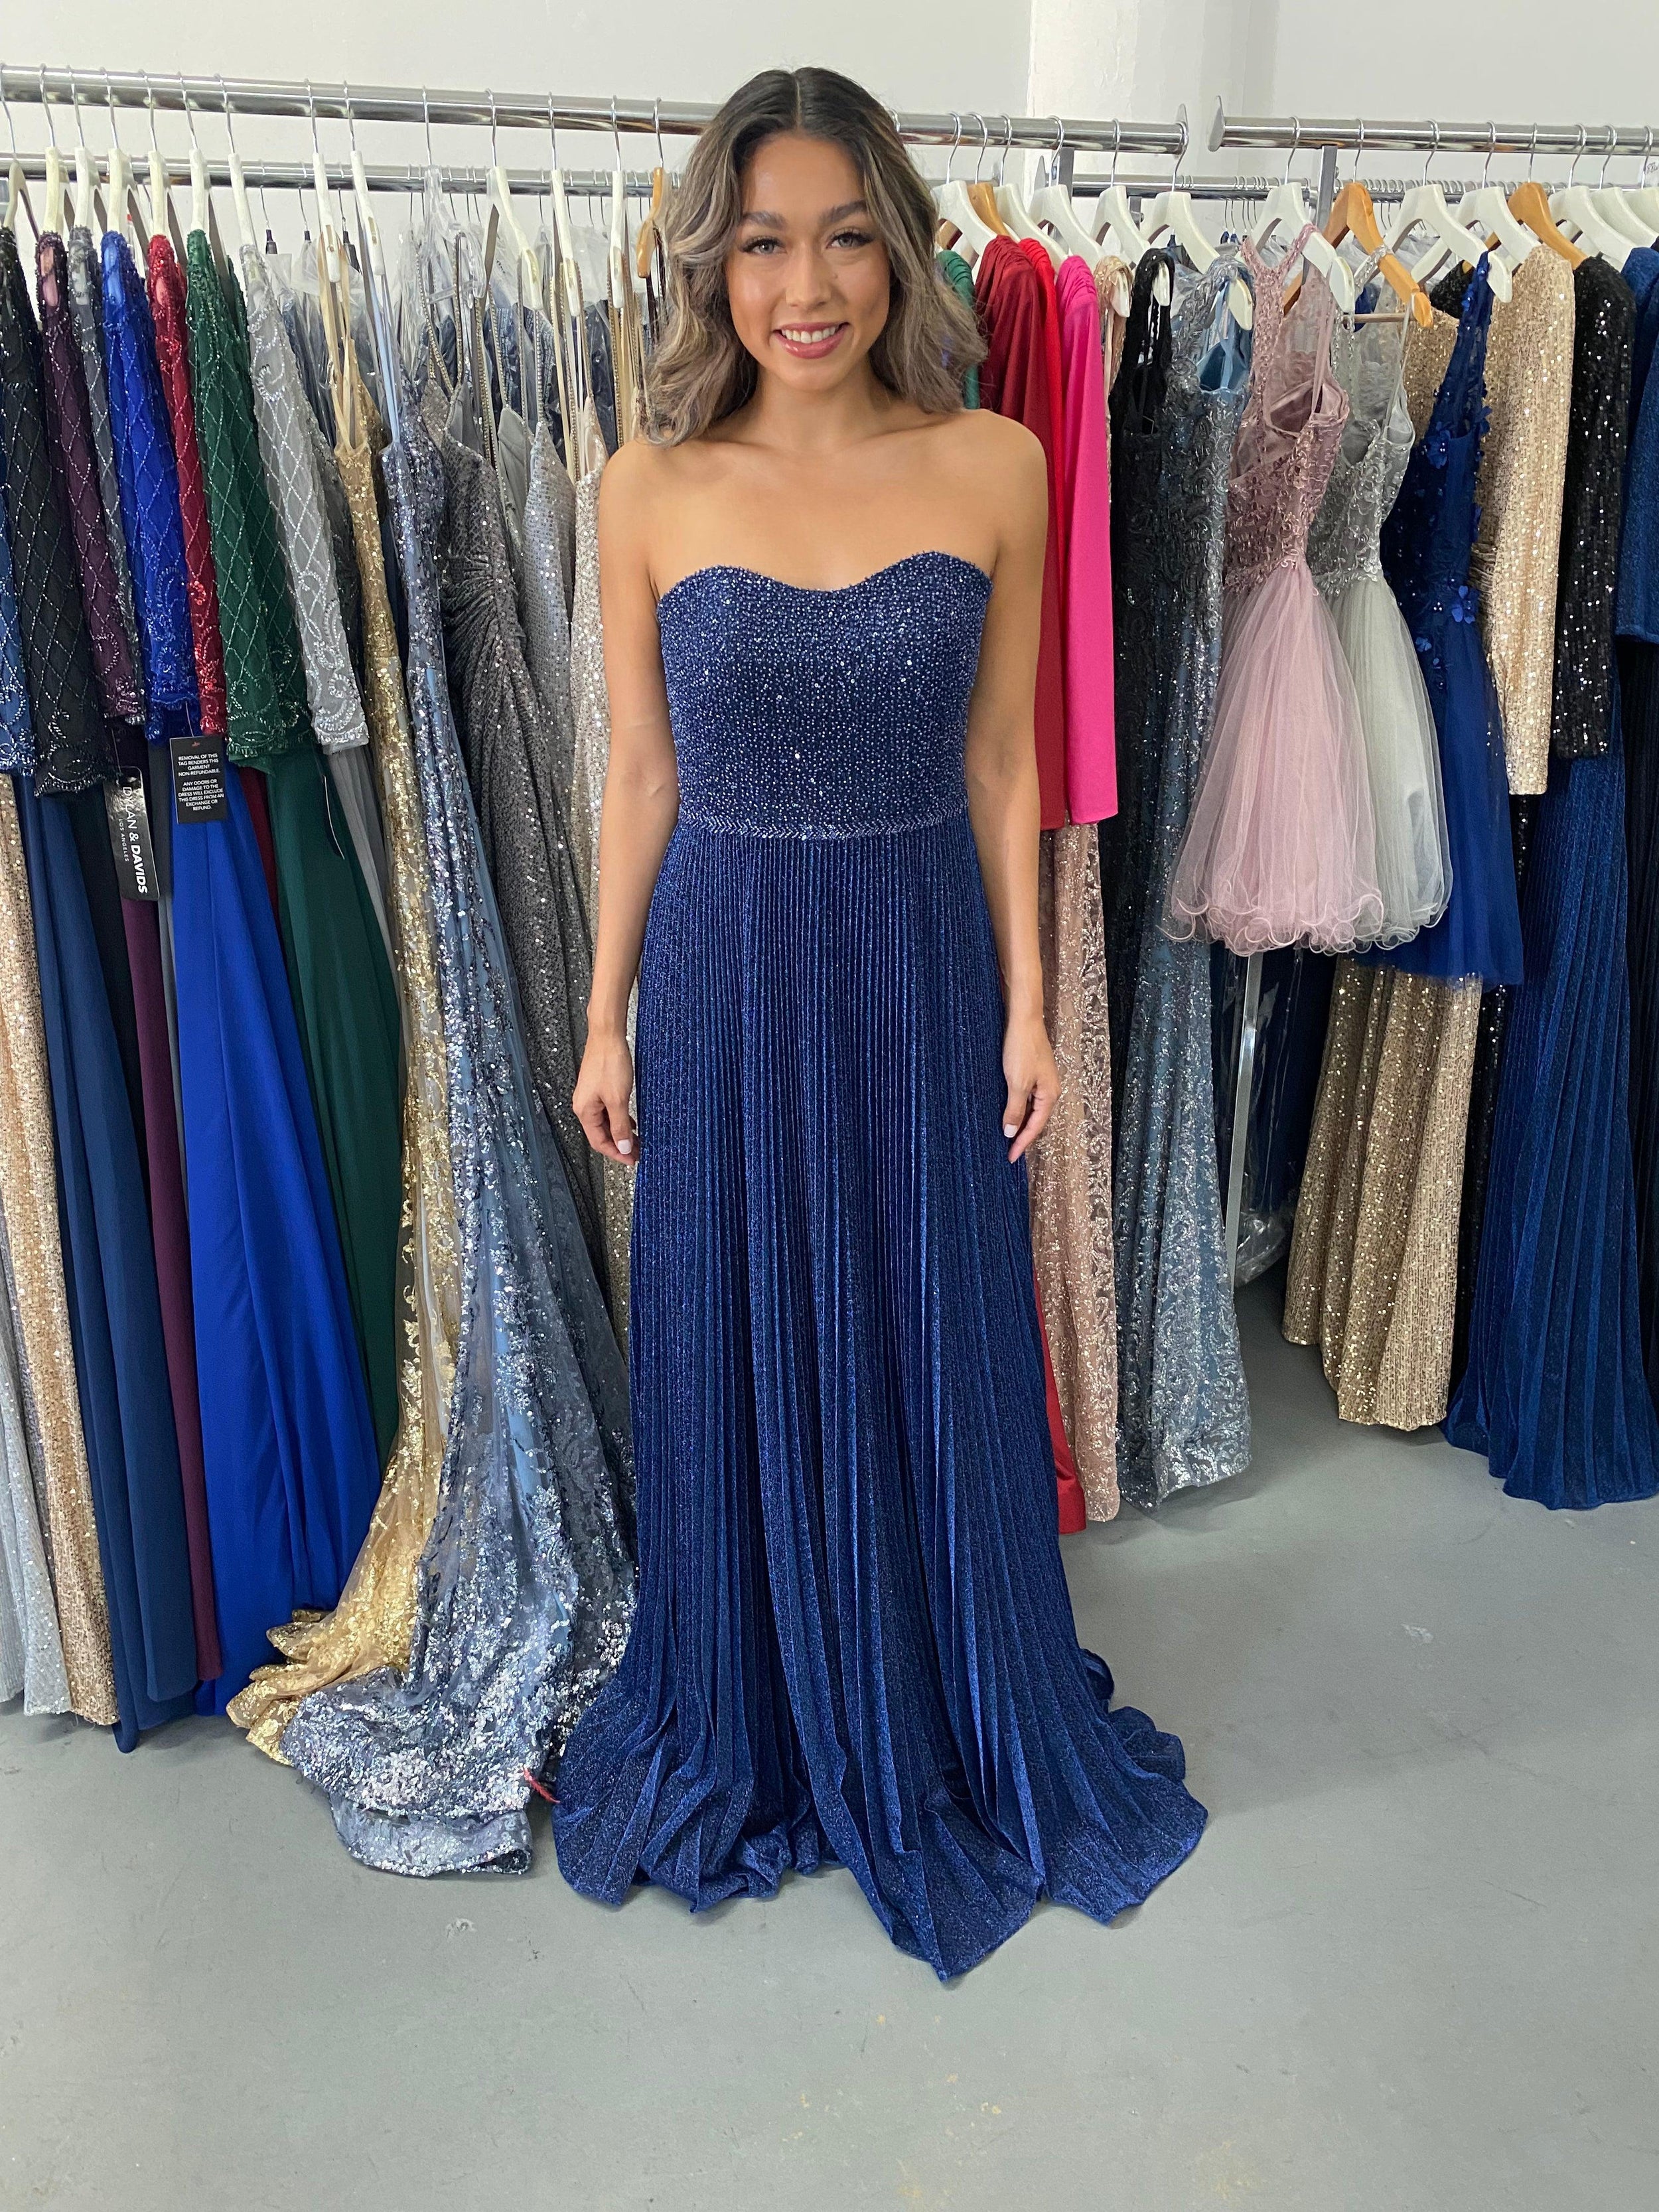 Strapless Long Prom Dress Sale - The Dress Outlet